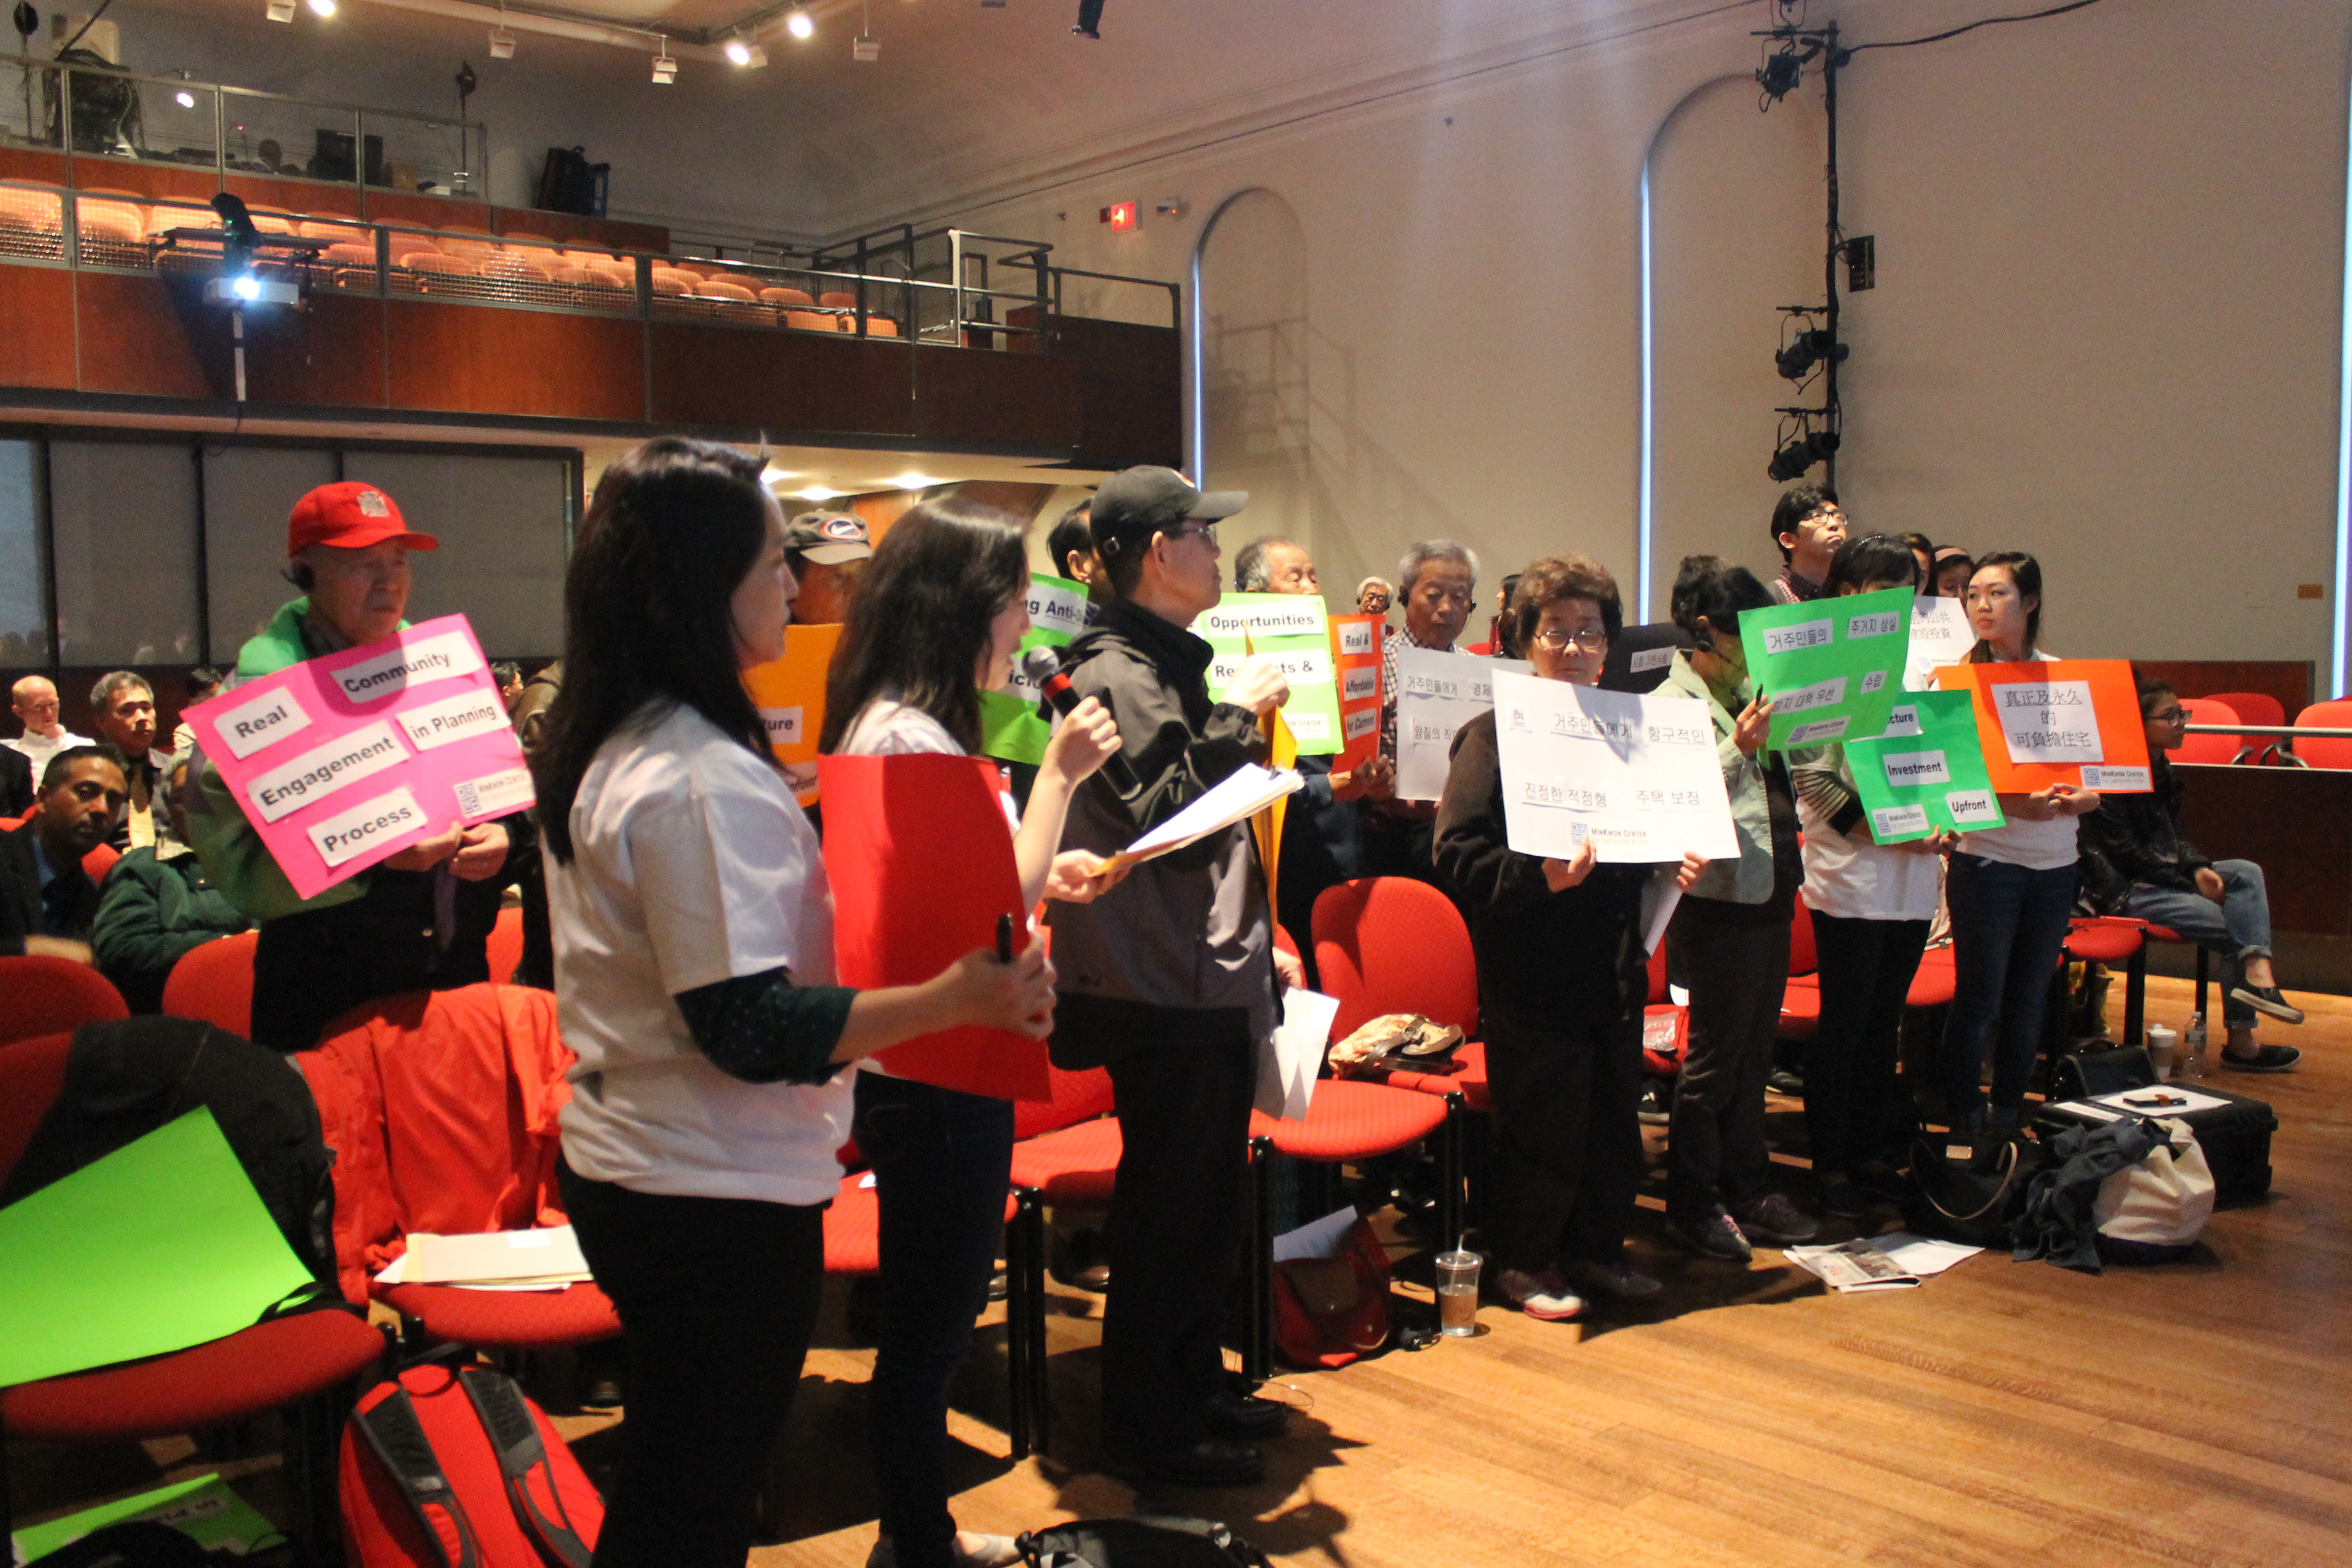 Members of the MinKwon Center for Community Action stood together to demonstrate their support for affordable housing in potential re-zoning of Flushing.